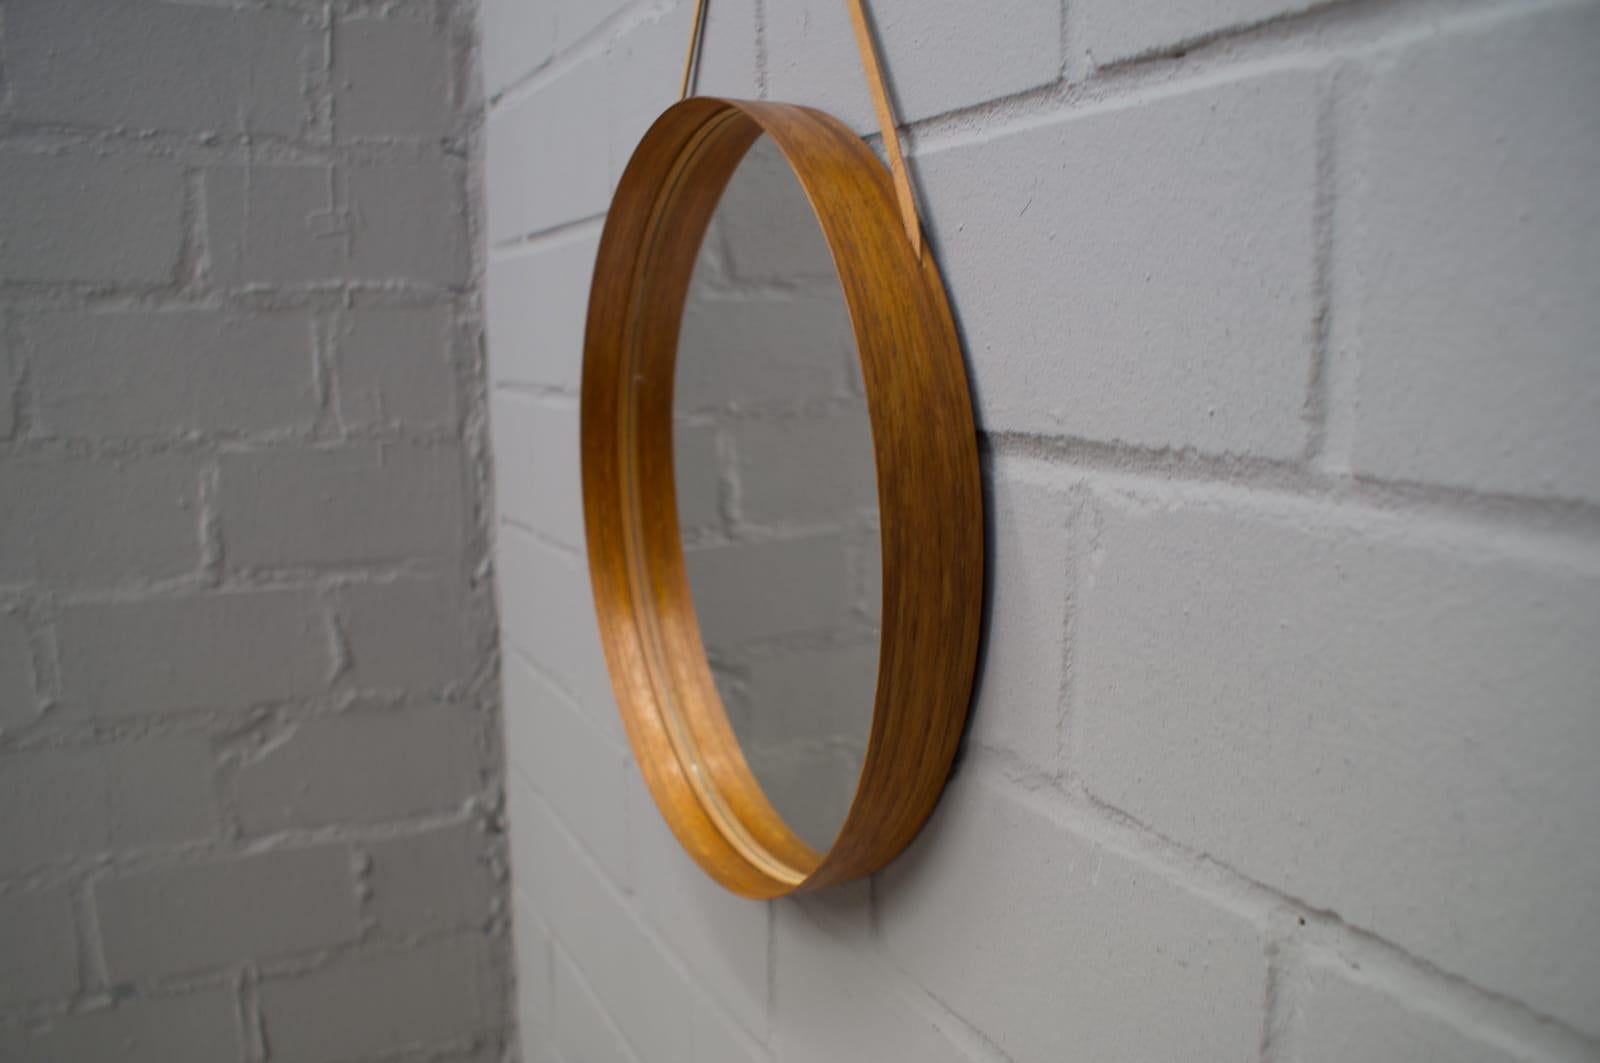 Mid-20th Century Wall Mirror in Teak Produced by Glass Mäster in Markaryd, Sweden 1960s For Sale